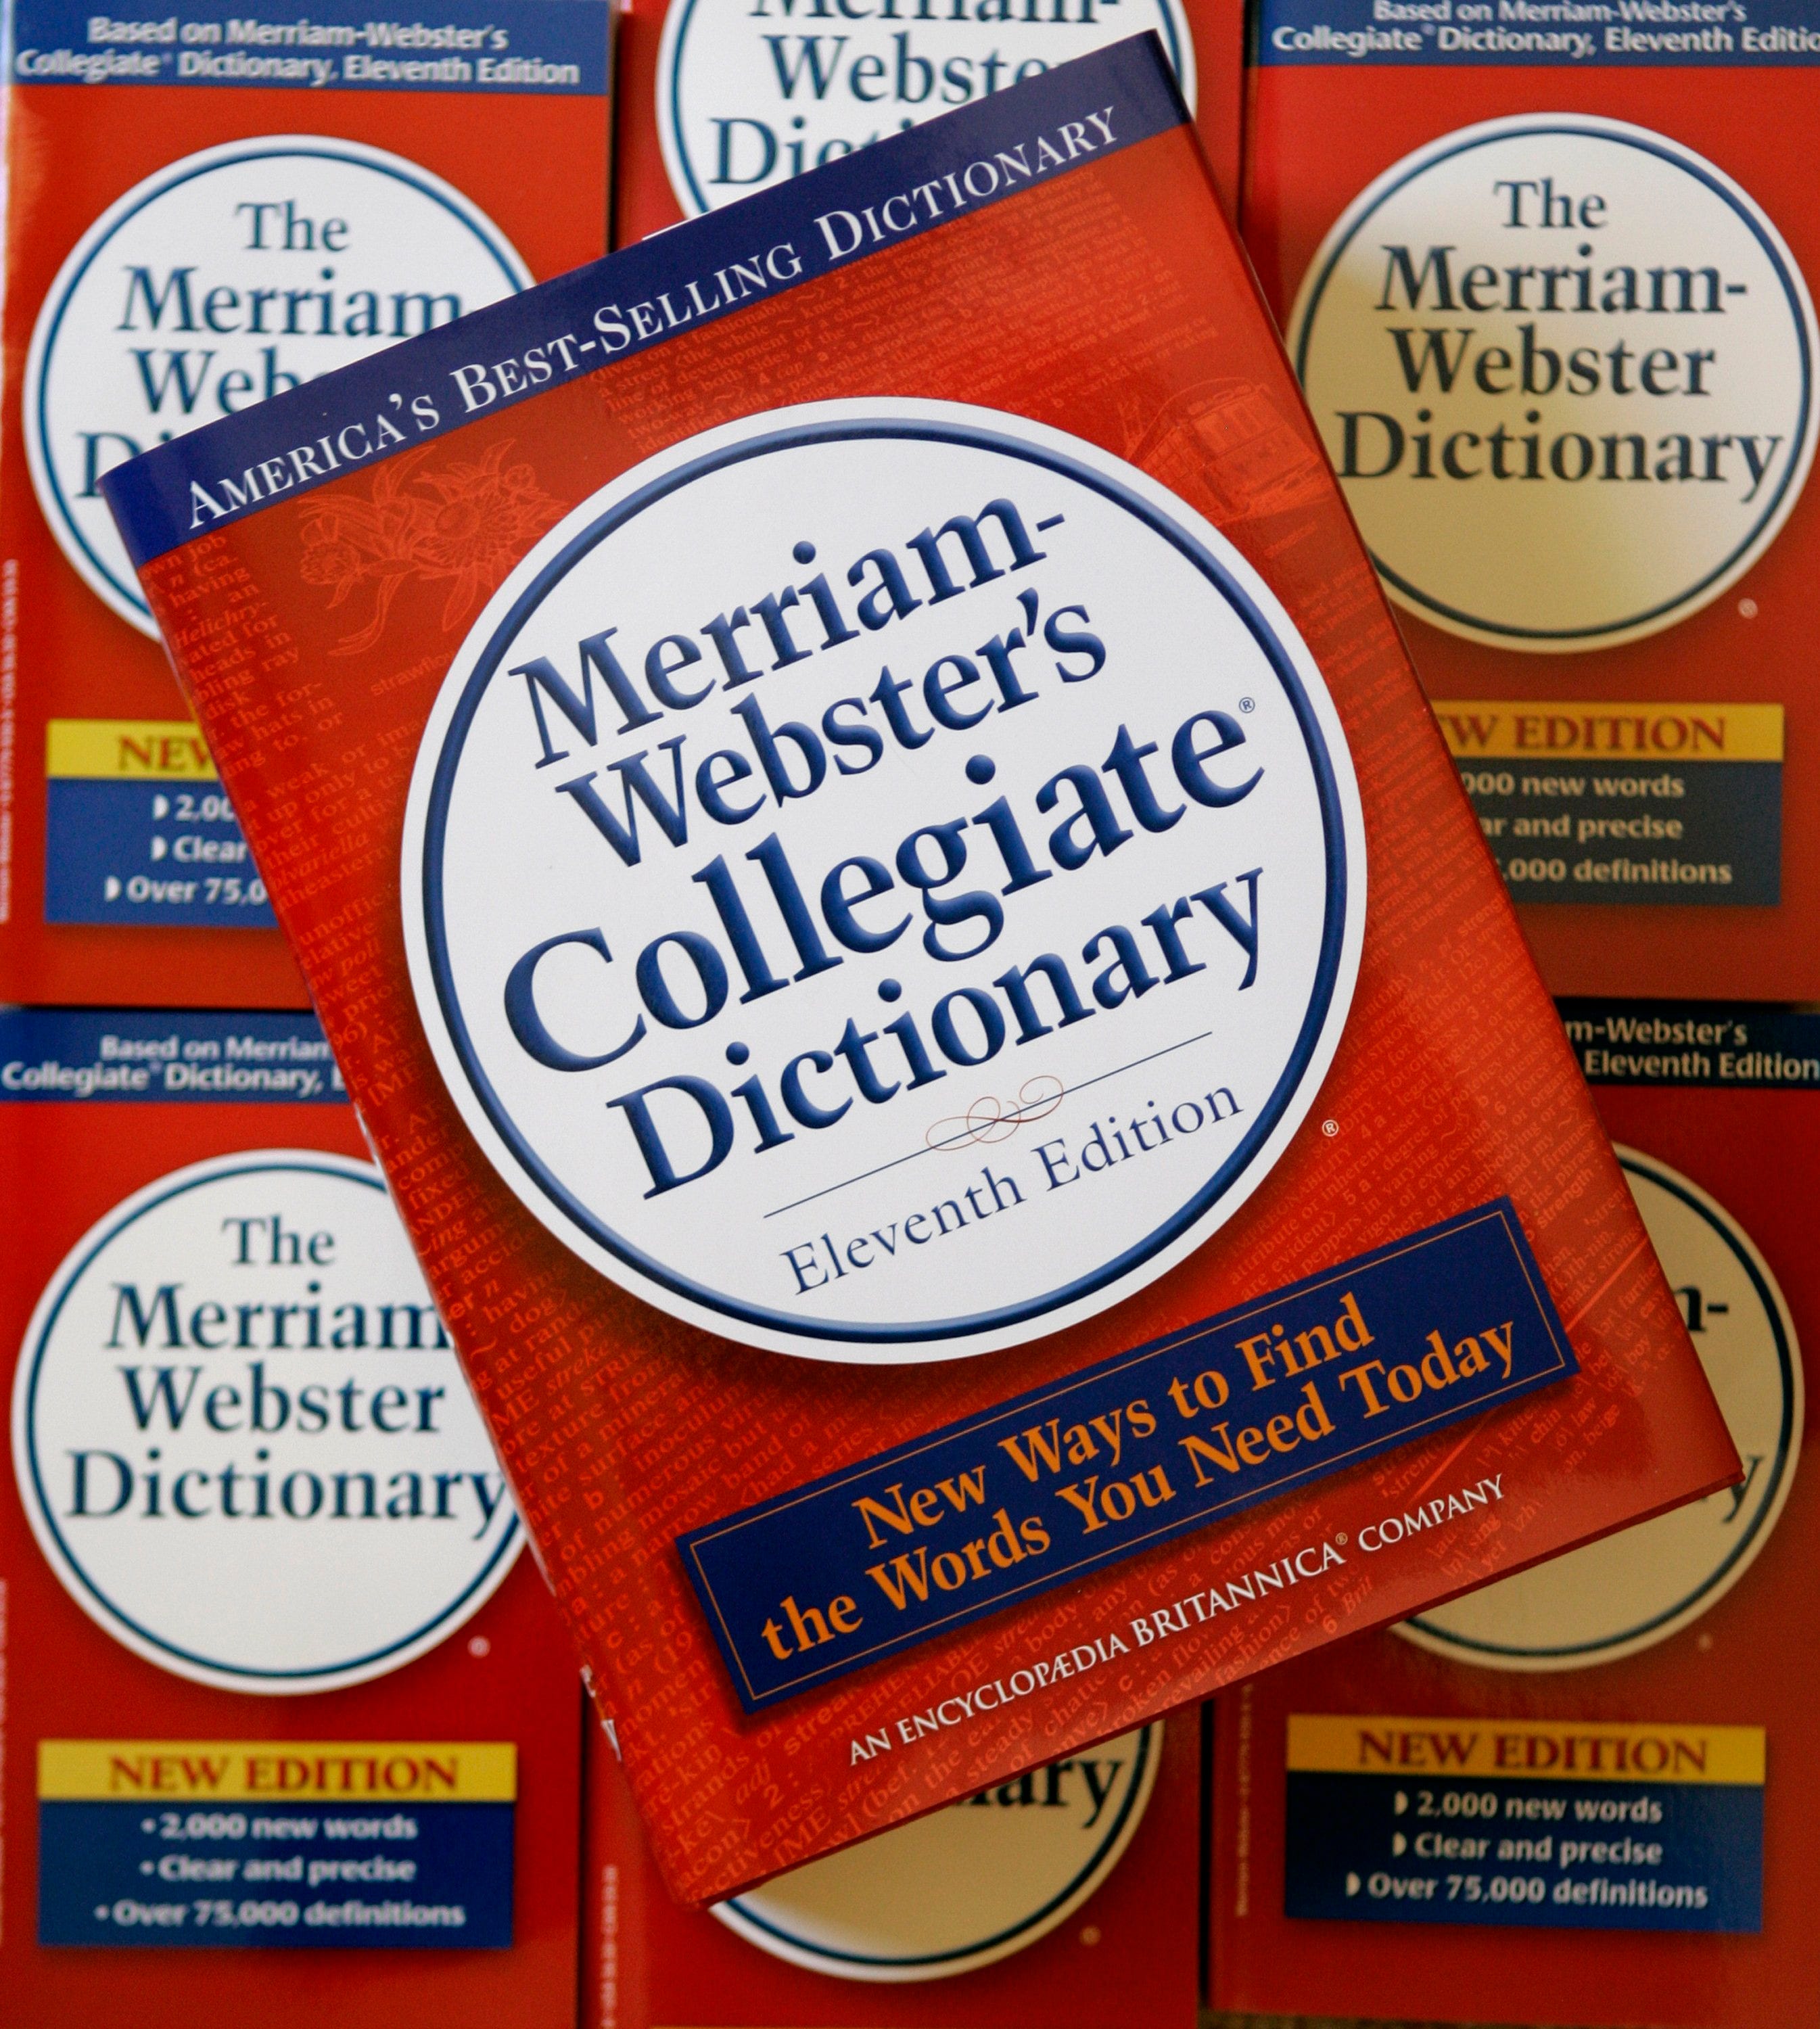 merriam webster dictionary download windows 7 free